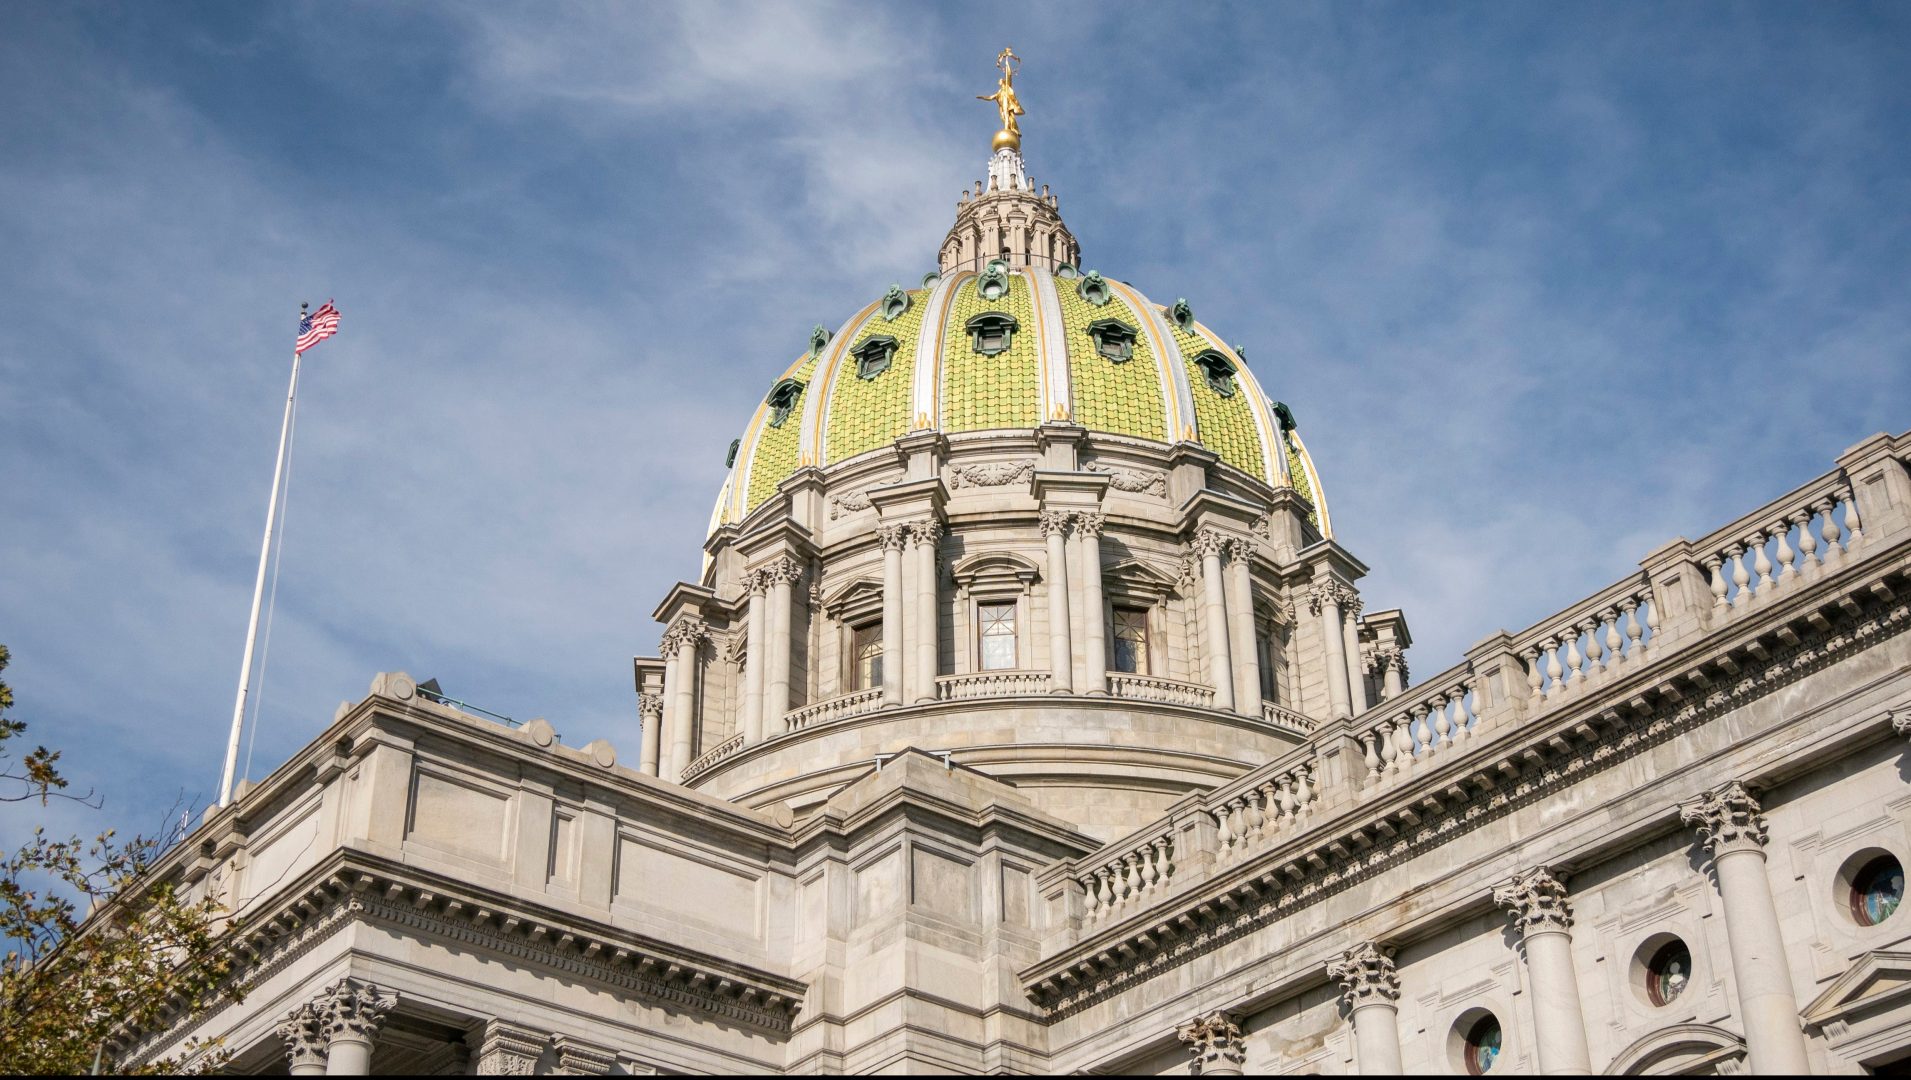 The Pennsylvania state Capitol is seen in this file photo.